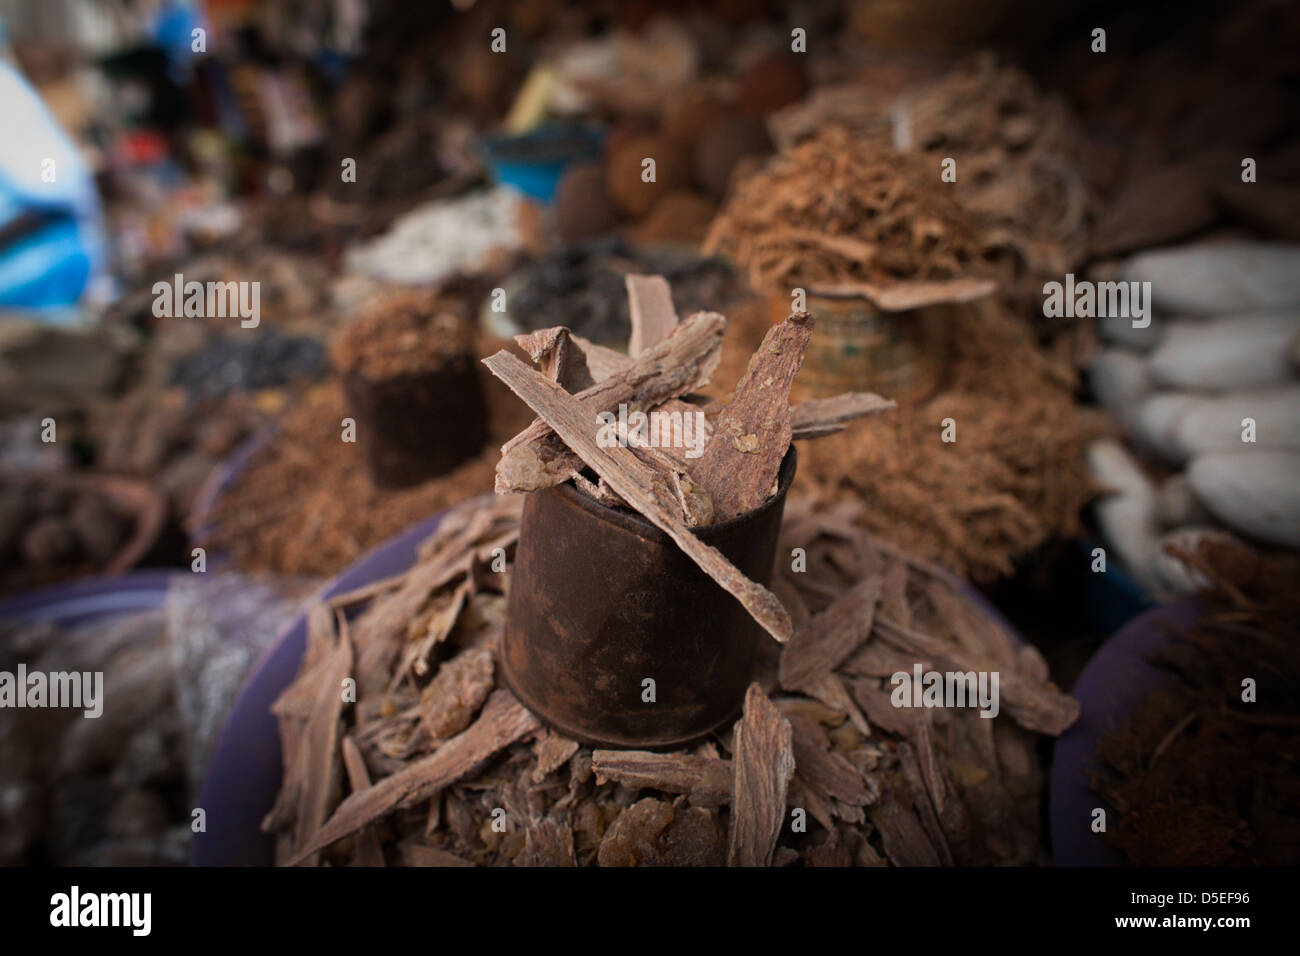 Various traditional medicines, including tree bark, in Timber Market, Accra, Ghana. Stock Photo